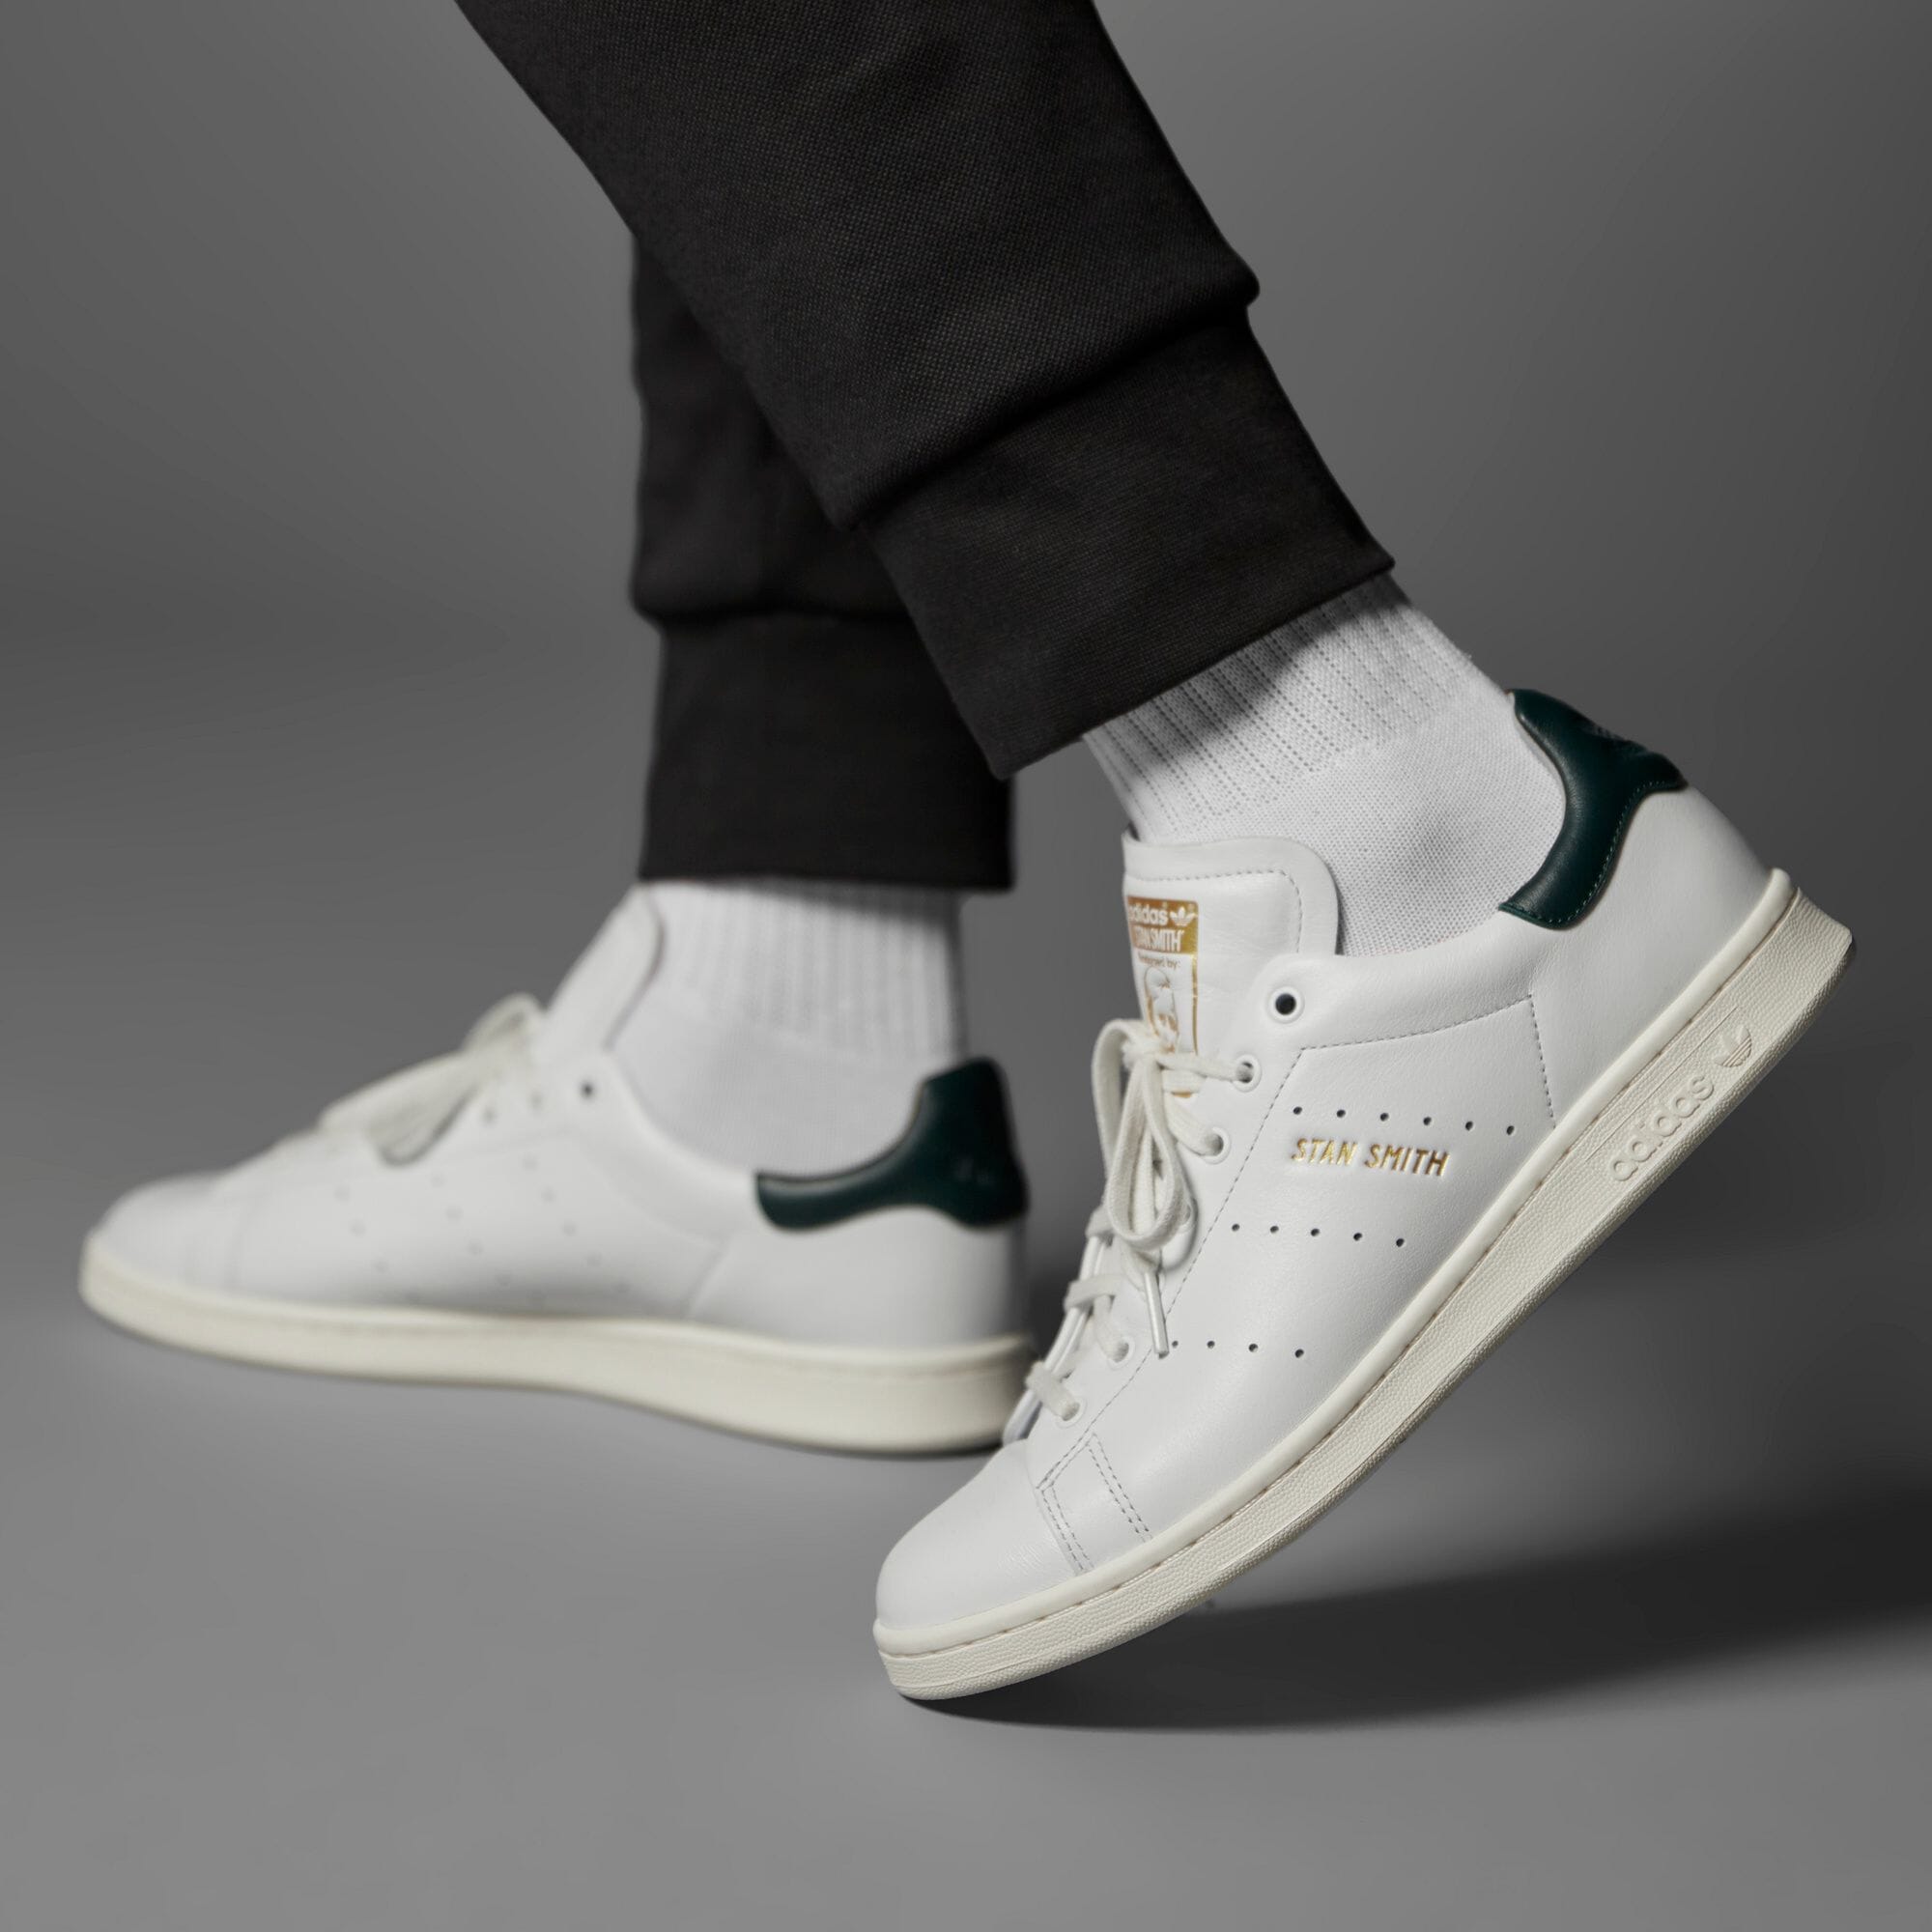  STANSMITH LUX HQ6787